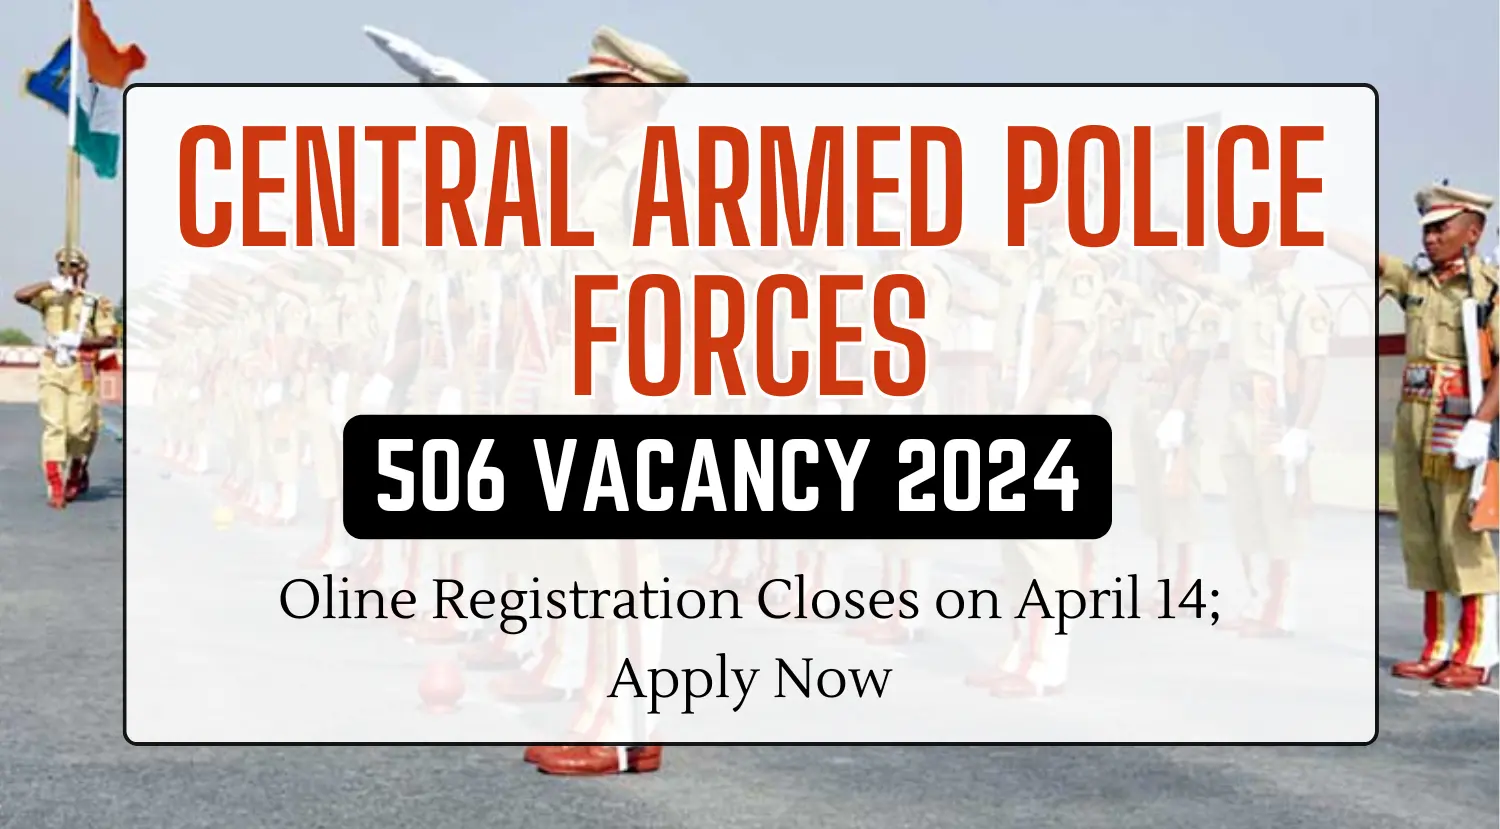 Central Armed Police Forces 500 Vacancy 2024 Oline Registration Closes on April 14 Apply Now